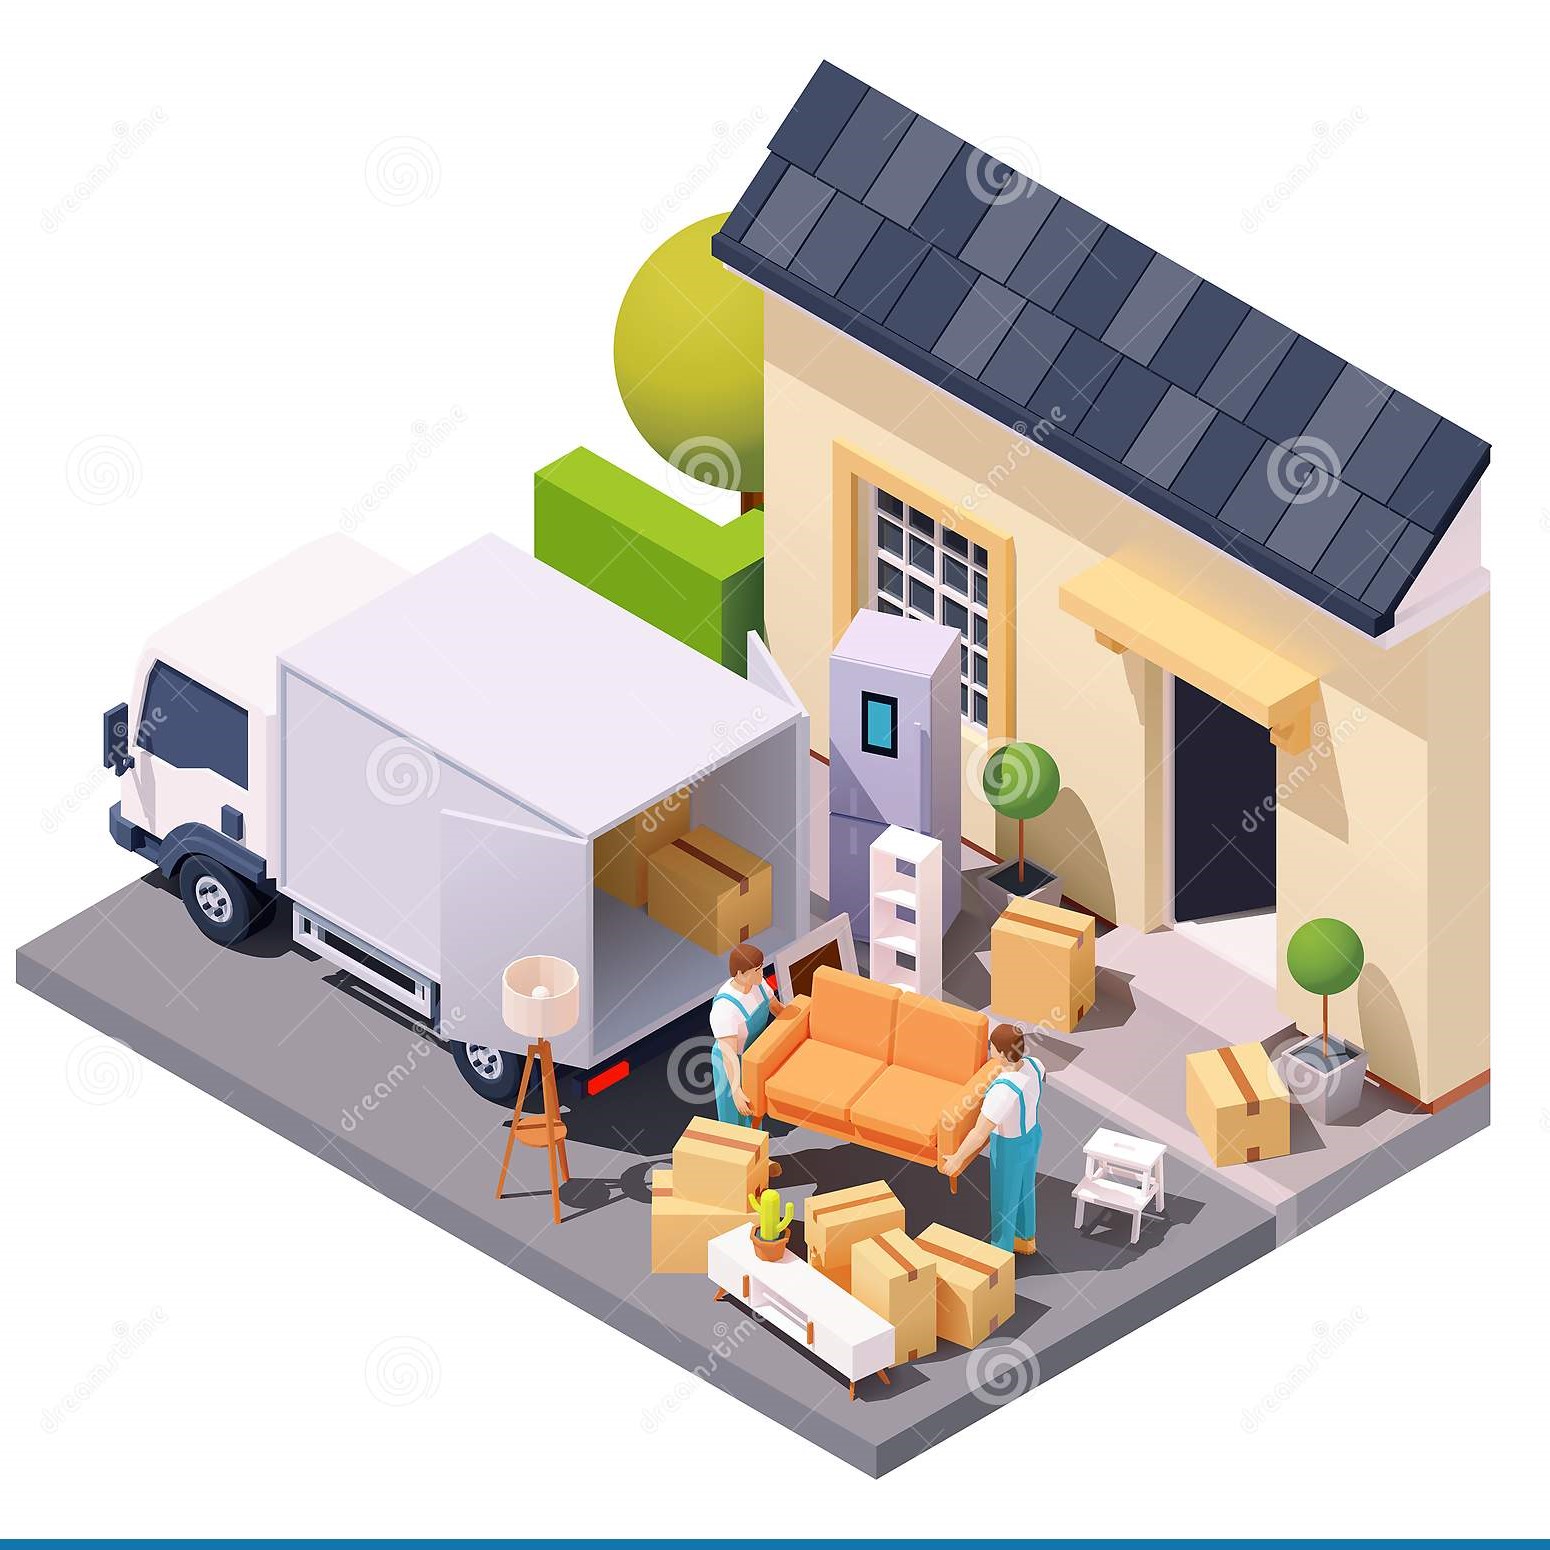 Qualities of Packers and Movers